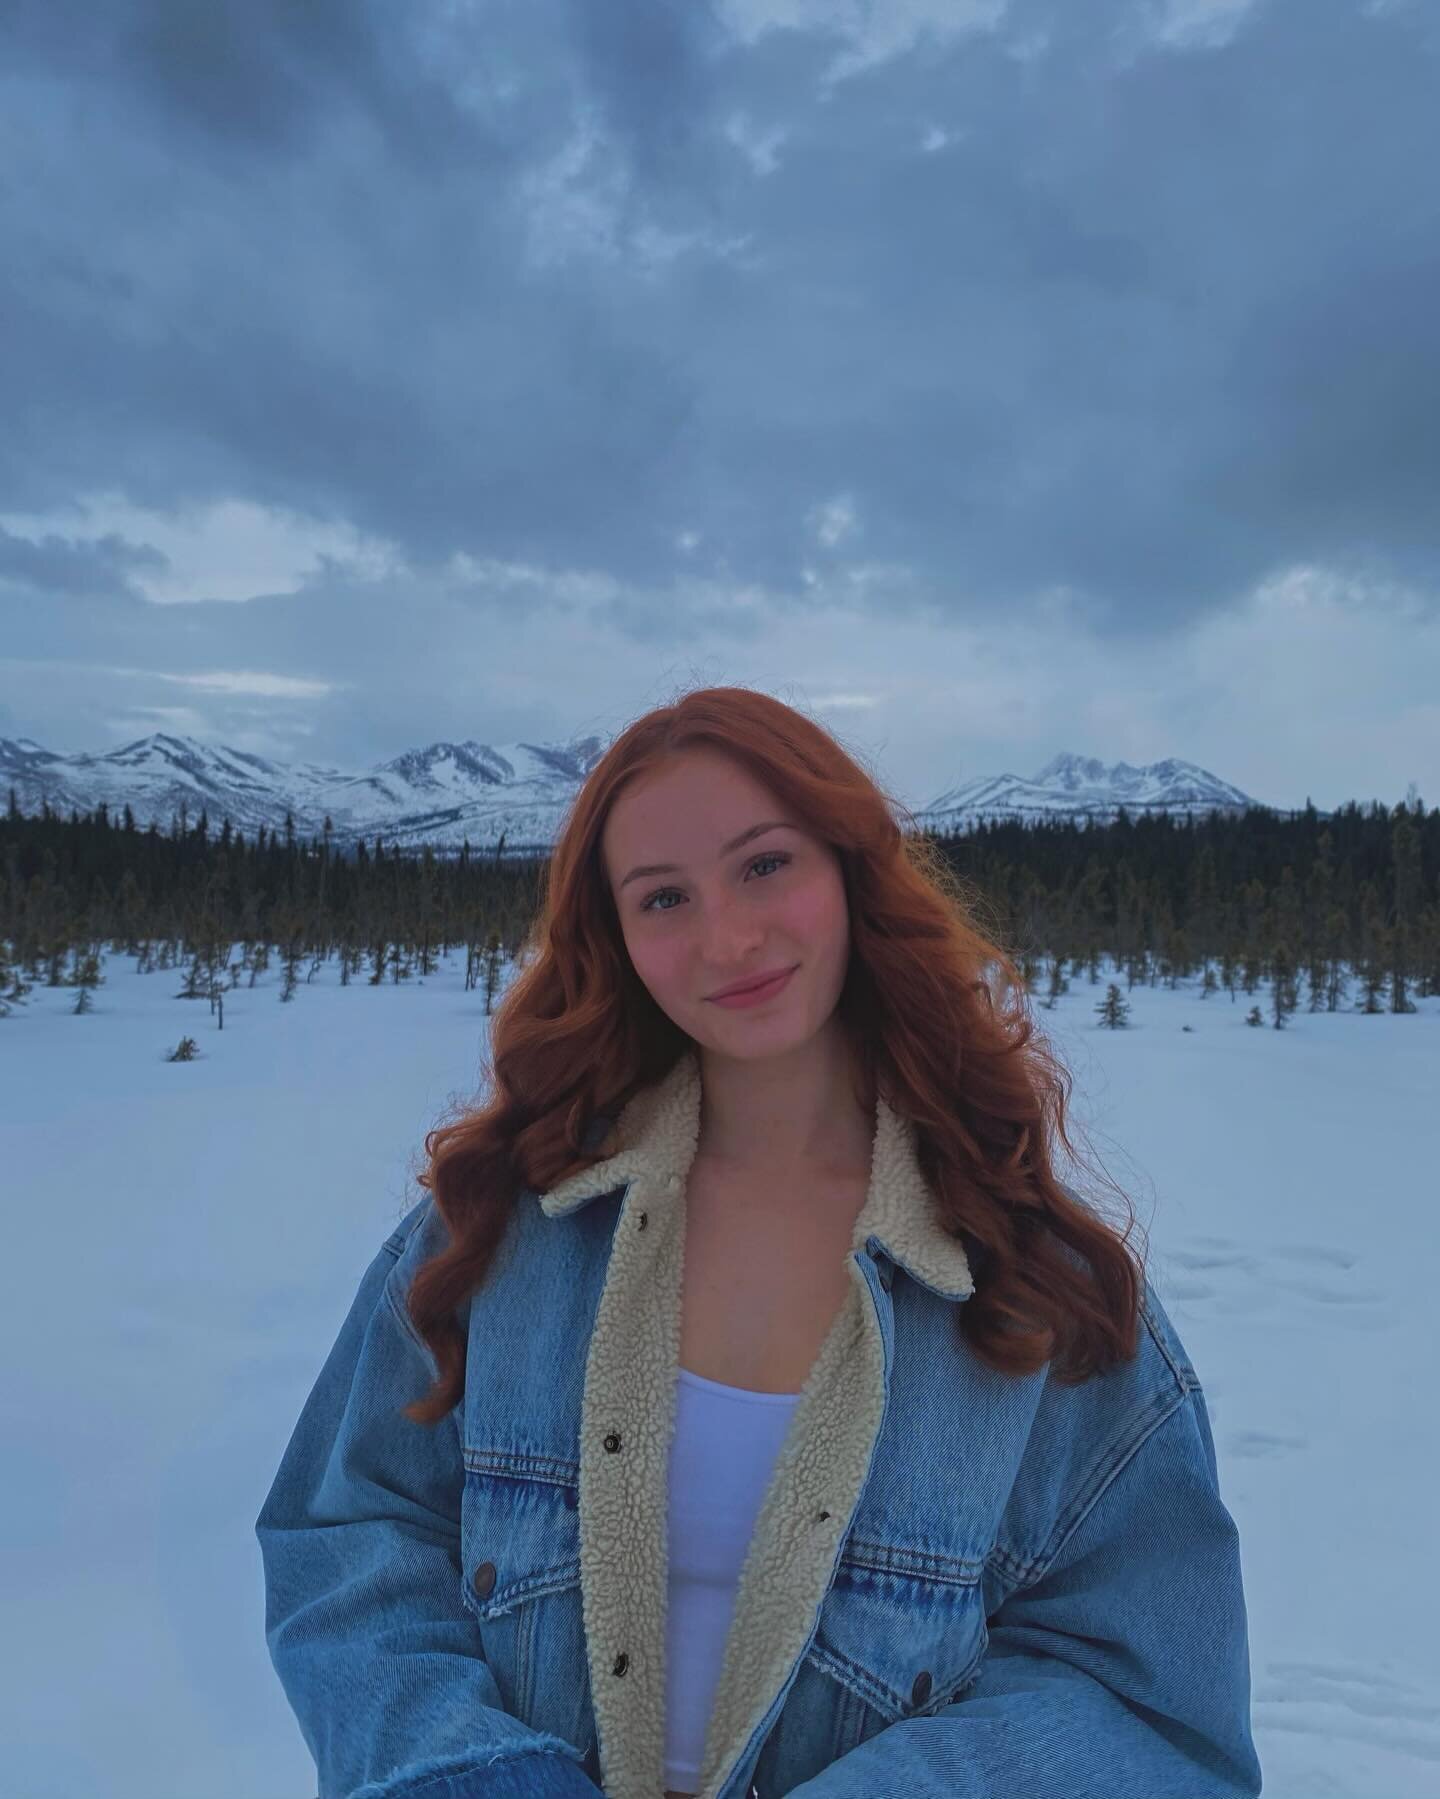 Happy birthday Isabel!! 🥳🎂🎉 Wishing you a wonderful birthday and cheers to the year ahead! We are thankful to have you a part of the team! 💙 #goldiescoffeeroasters #alaska #hbd